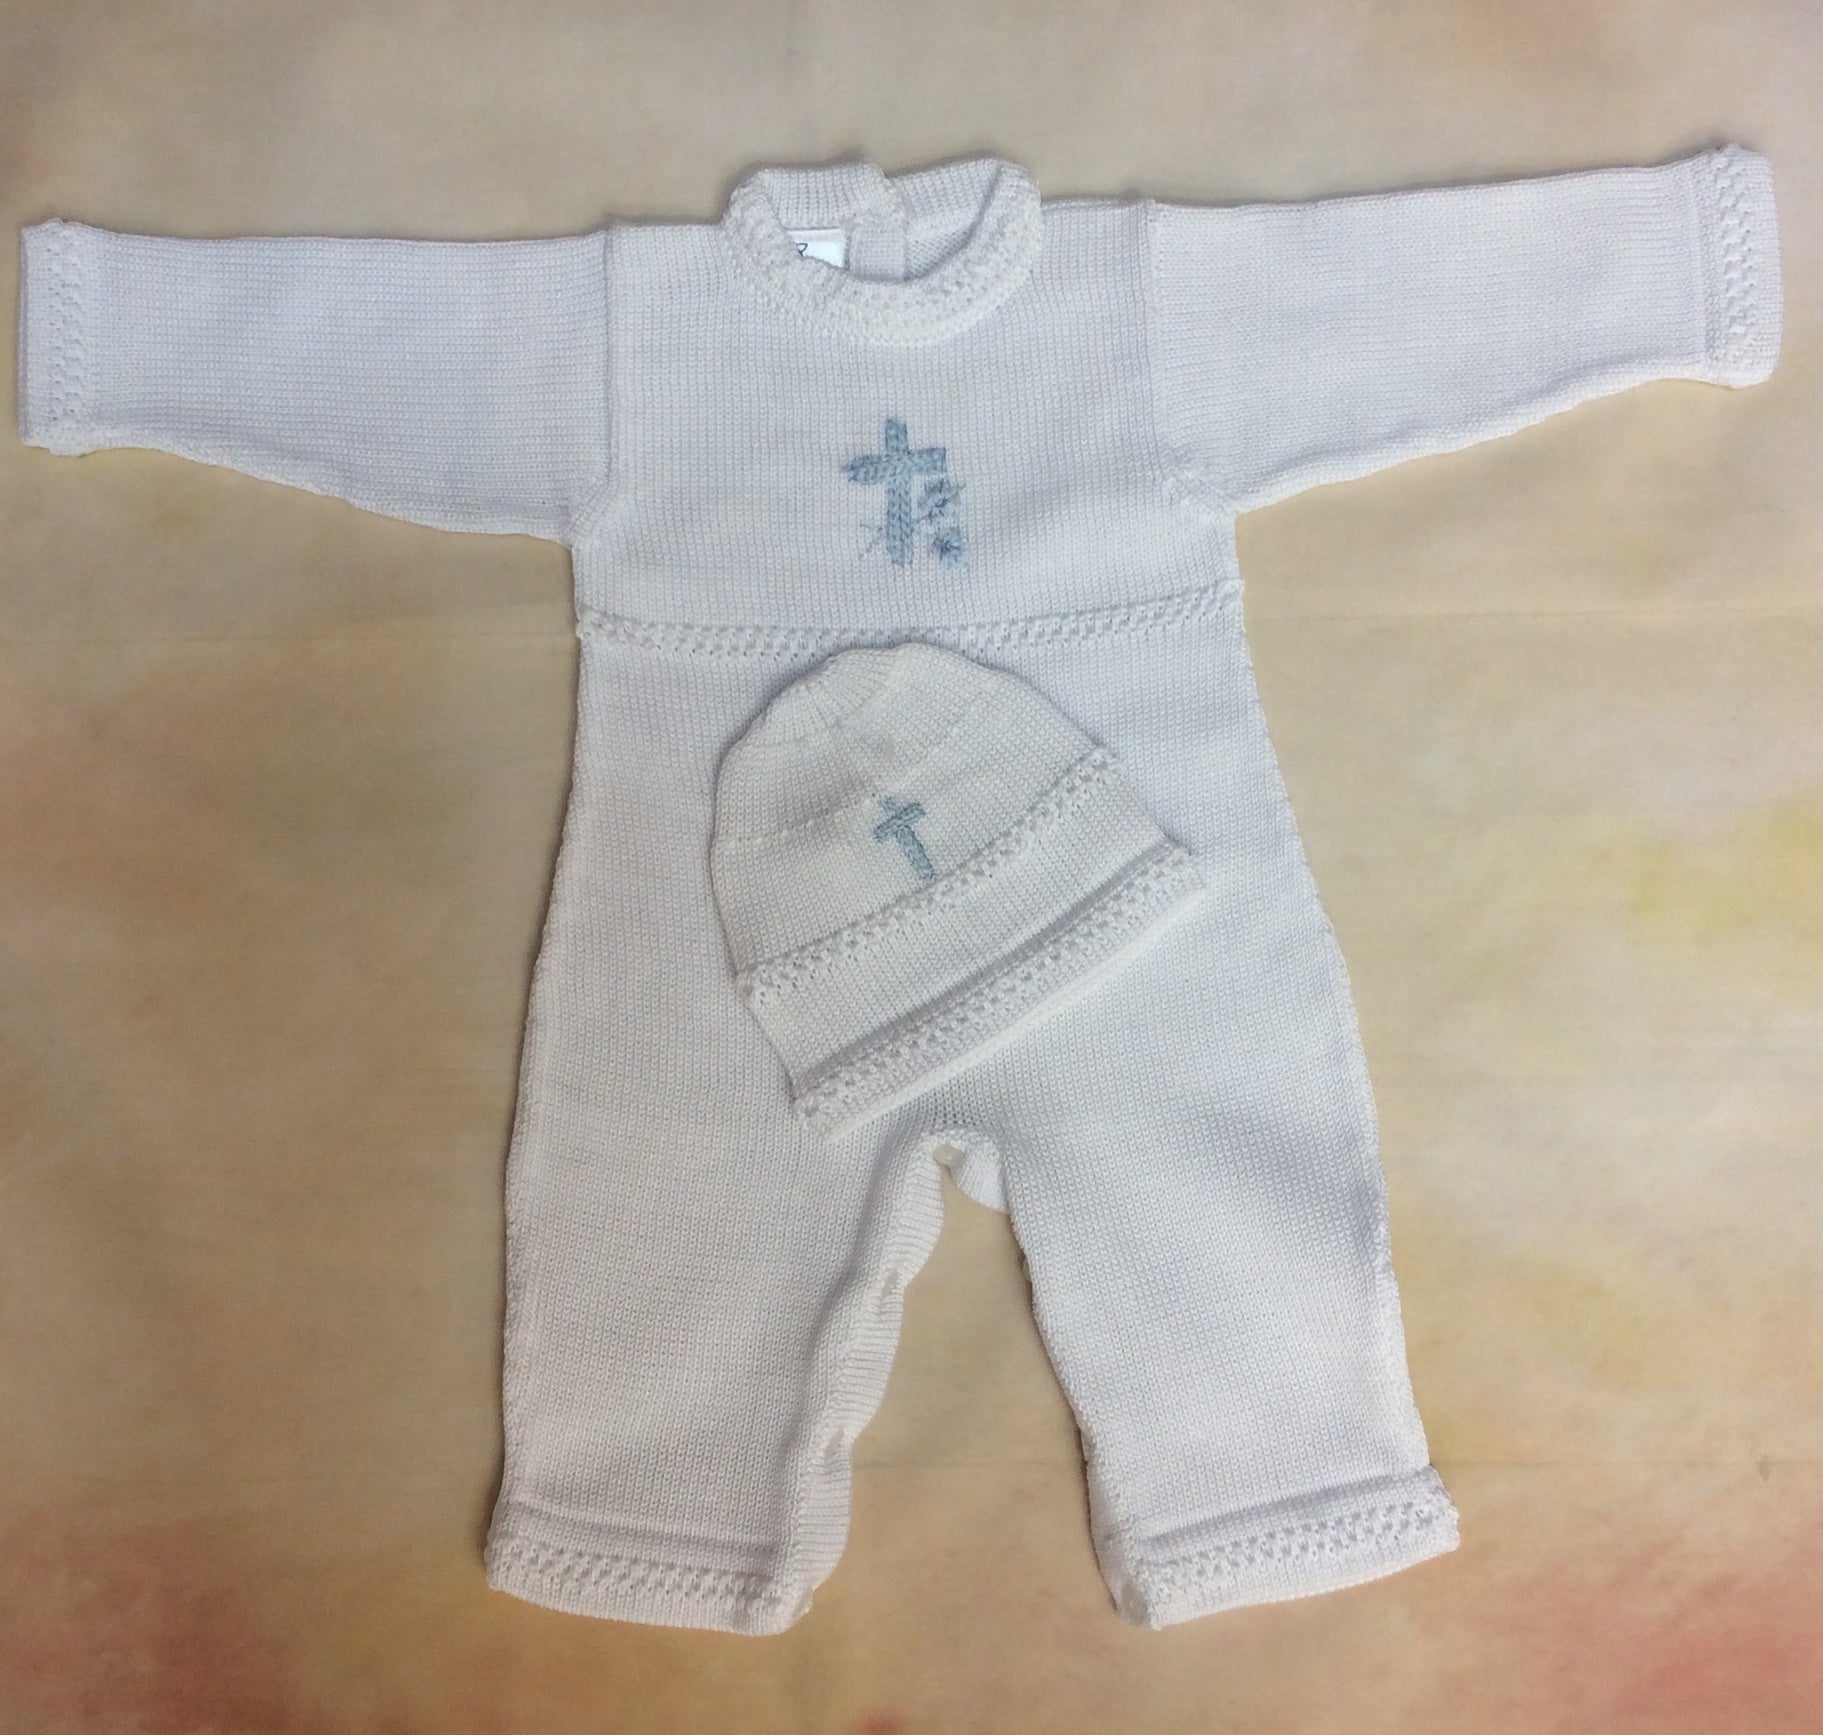 ATKSP90WB Boys Christening Knit outfit w/blue Cross long sleeve/long pant-Nenes Lullaby Boutique Inc-Nenes Lullaby Boutique Inc